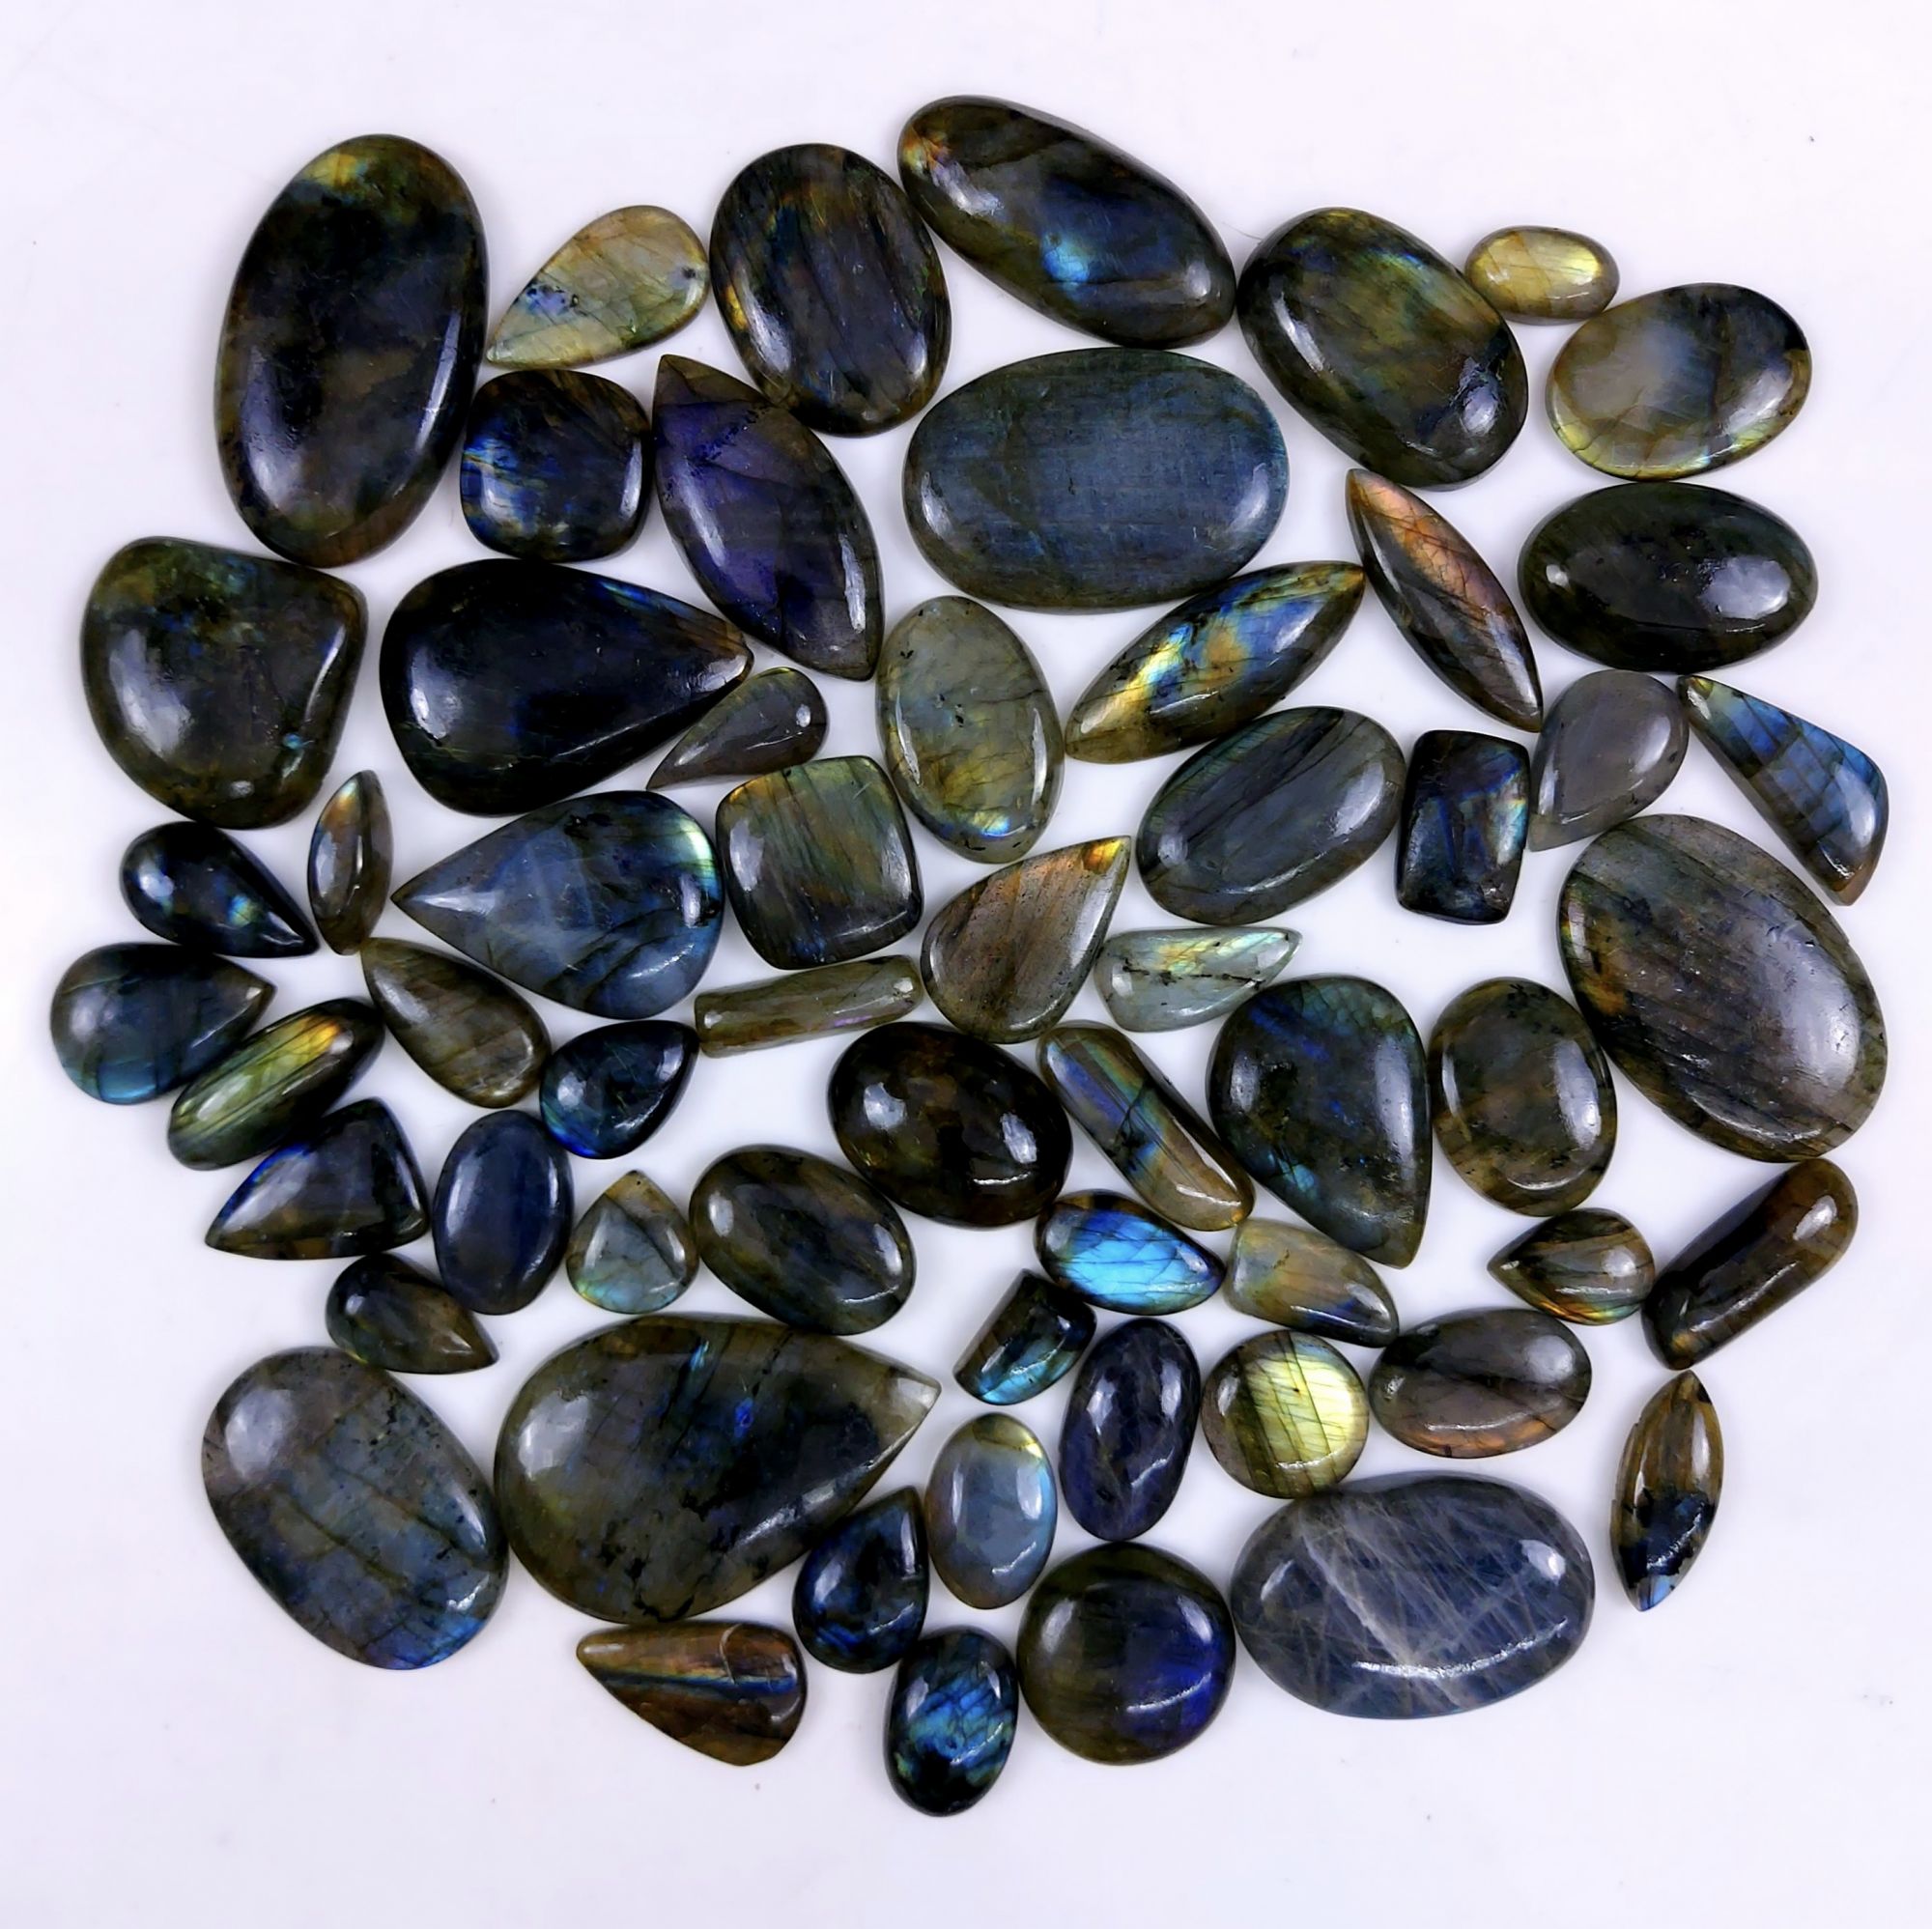 59pc 1750Cts Labradorite Cabochon Multifire Healing Crystal For Jewelry Supplies, Labradorite Necklace Handmade Wire Wrapped Gemstone Pendant 45x28 19x16mm#6365